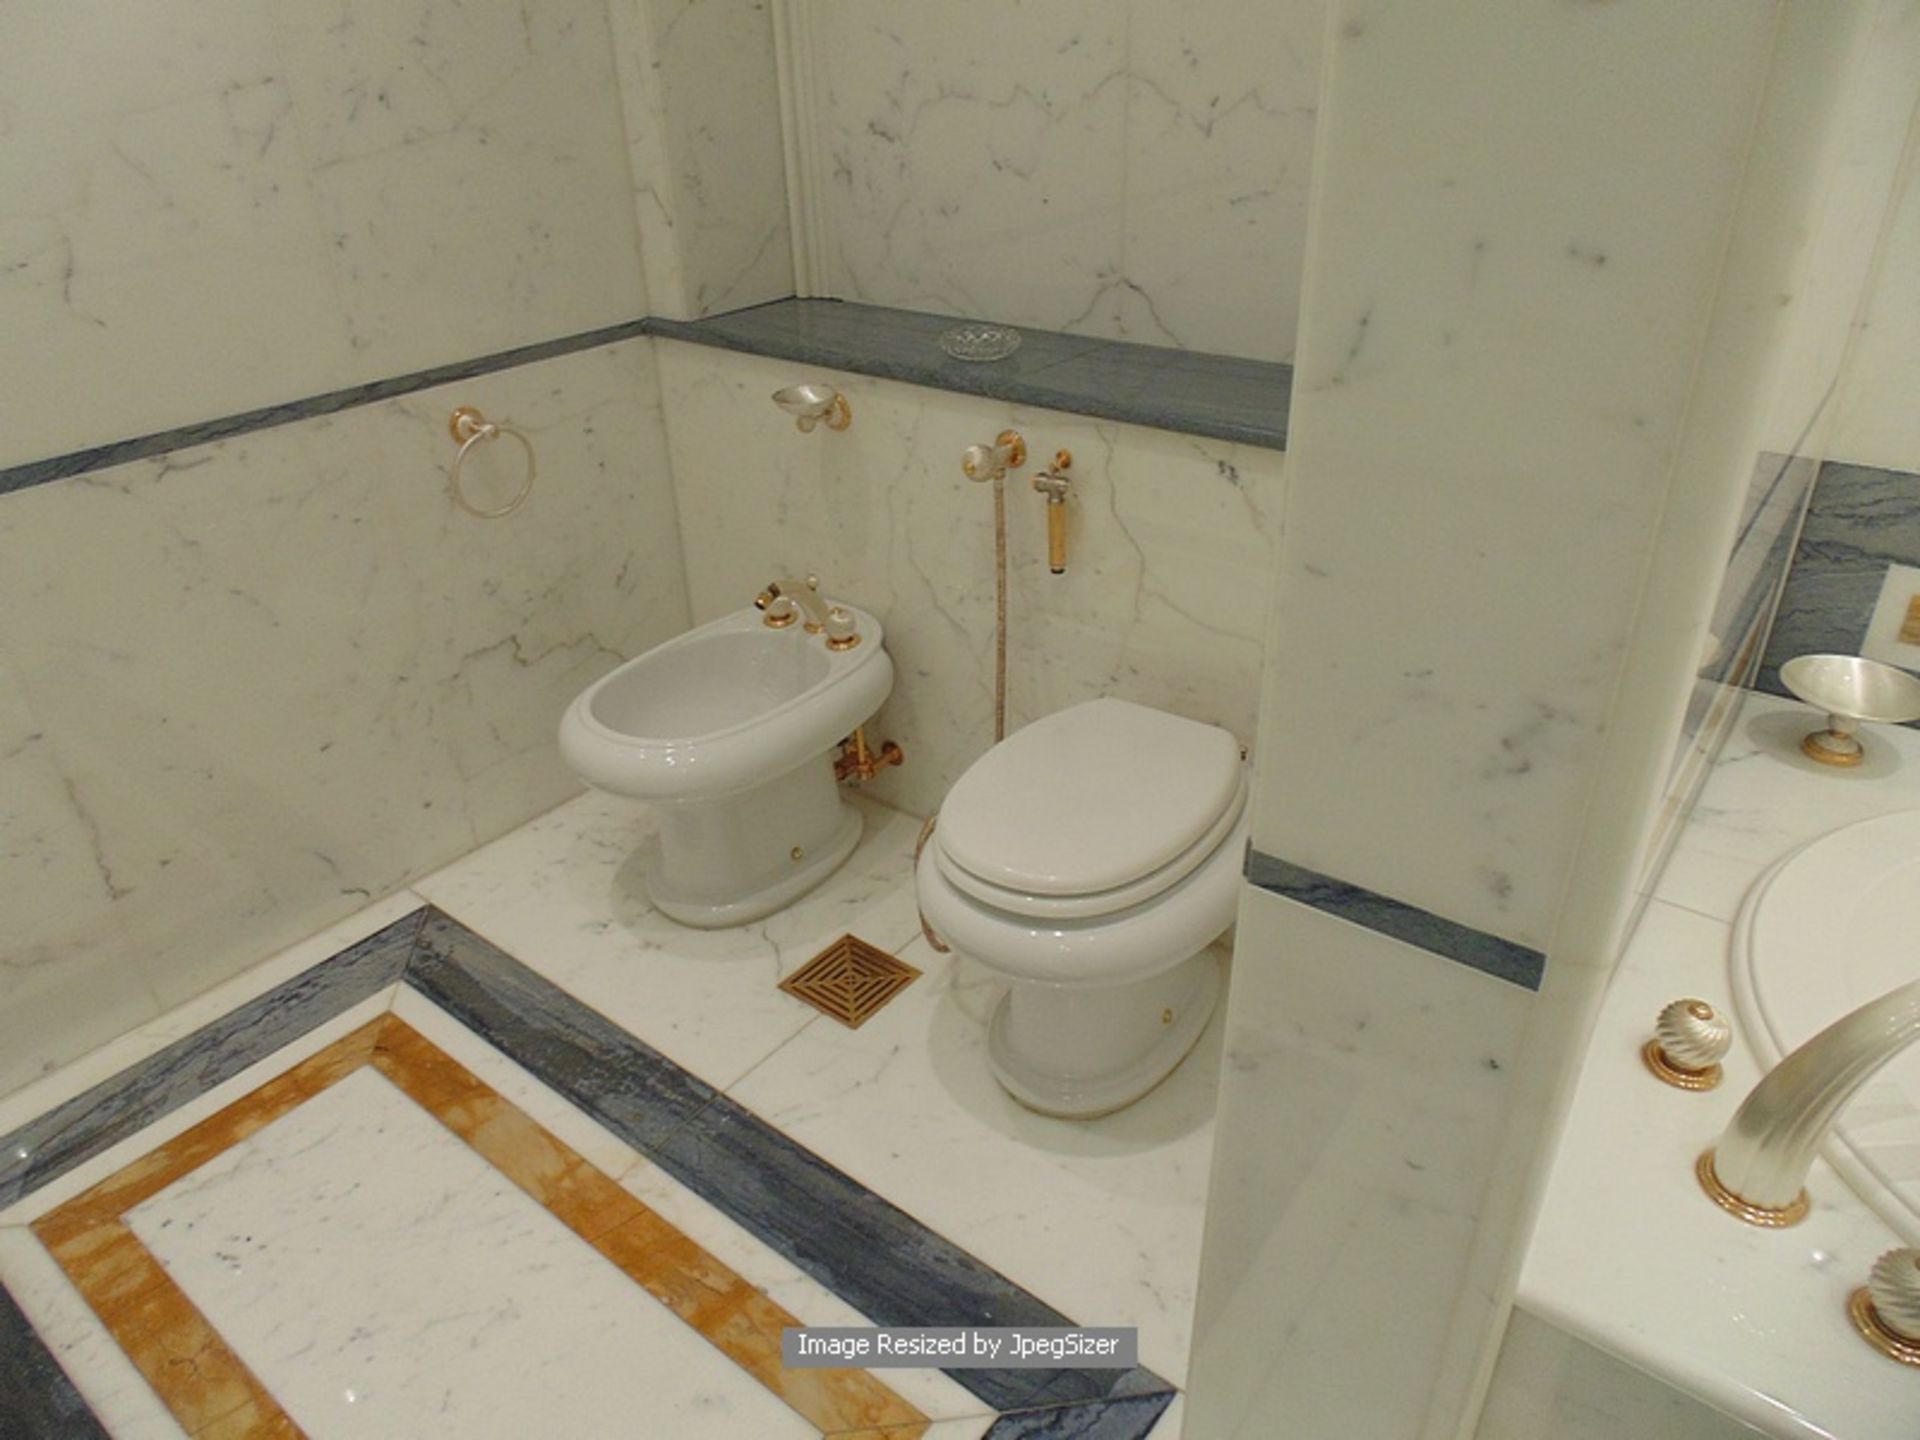 Ensuite bath, shower, vanity unit, bidet and WC bathroom accessories and furniture from Baldi Home - Image 3 of 5